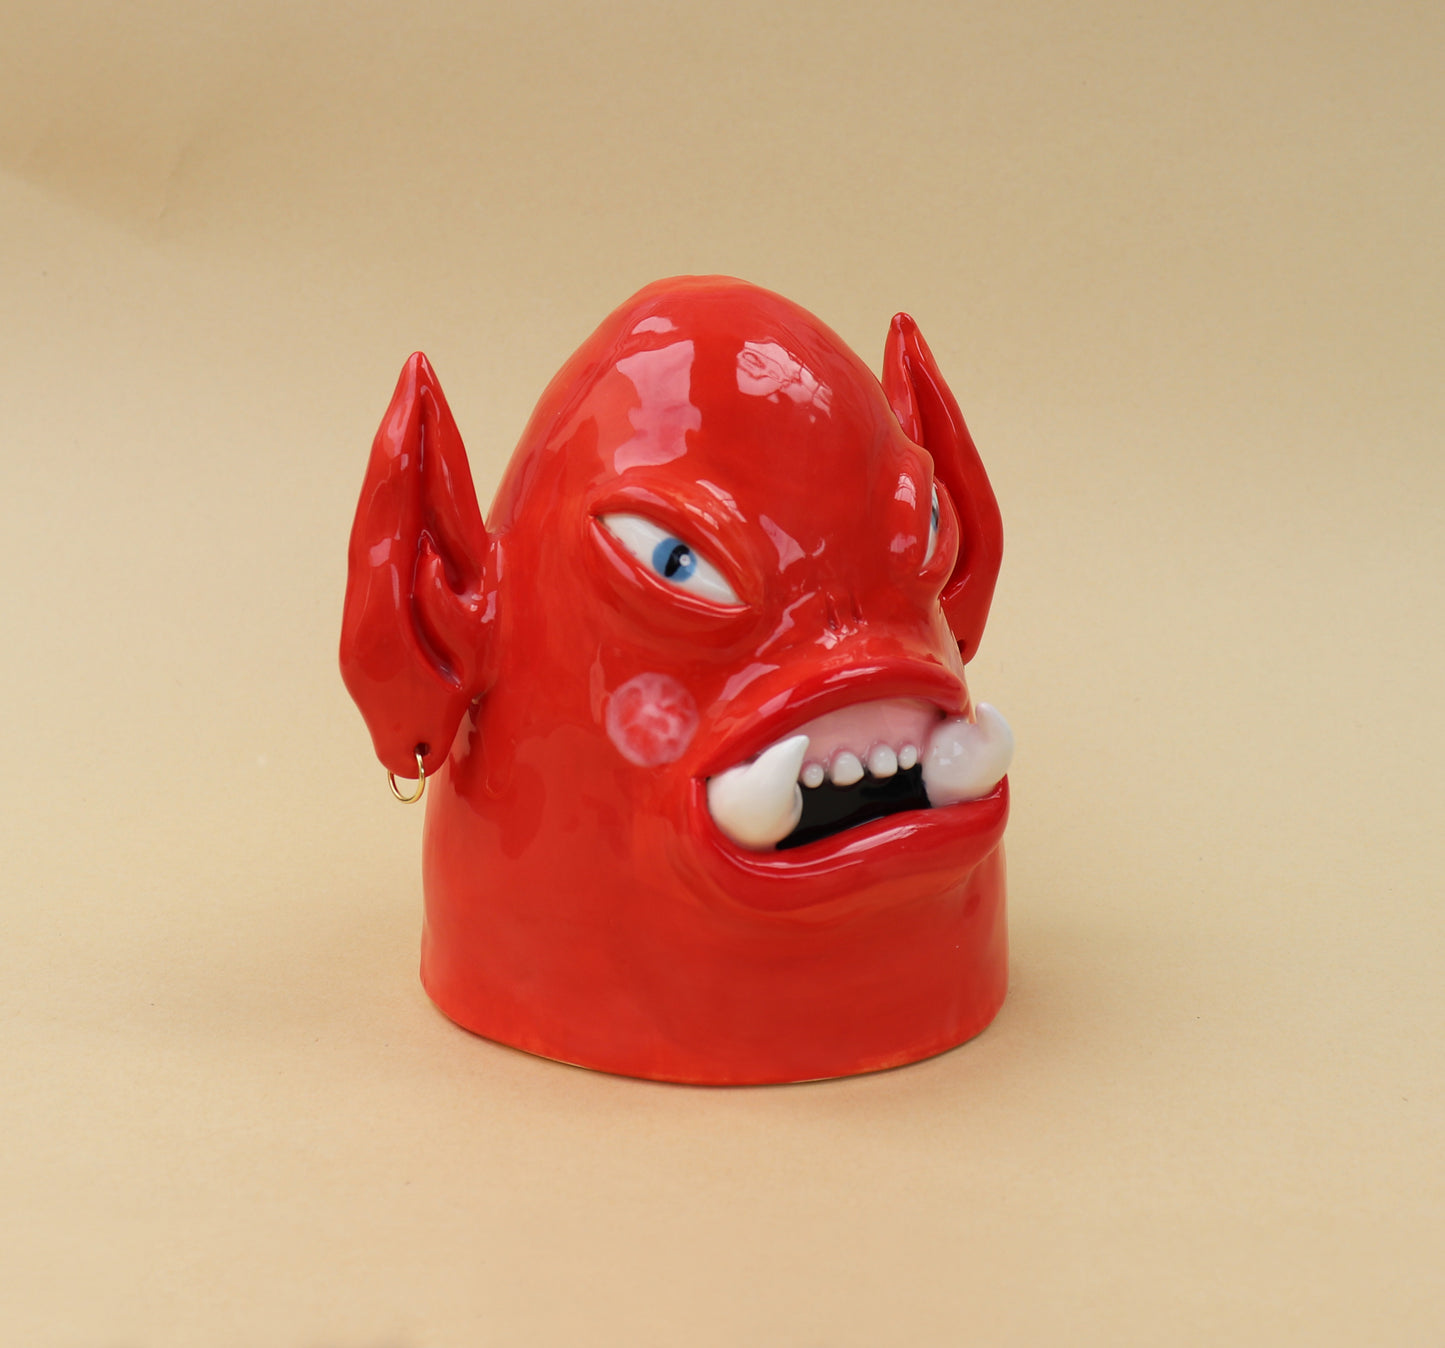 Big Red Gobby